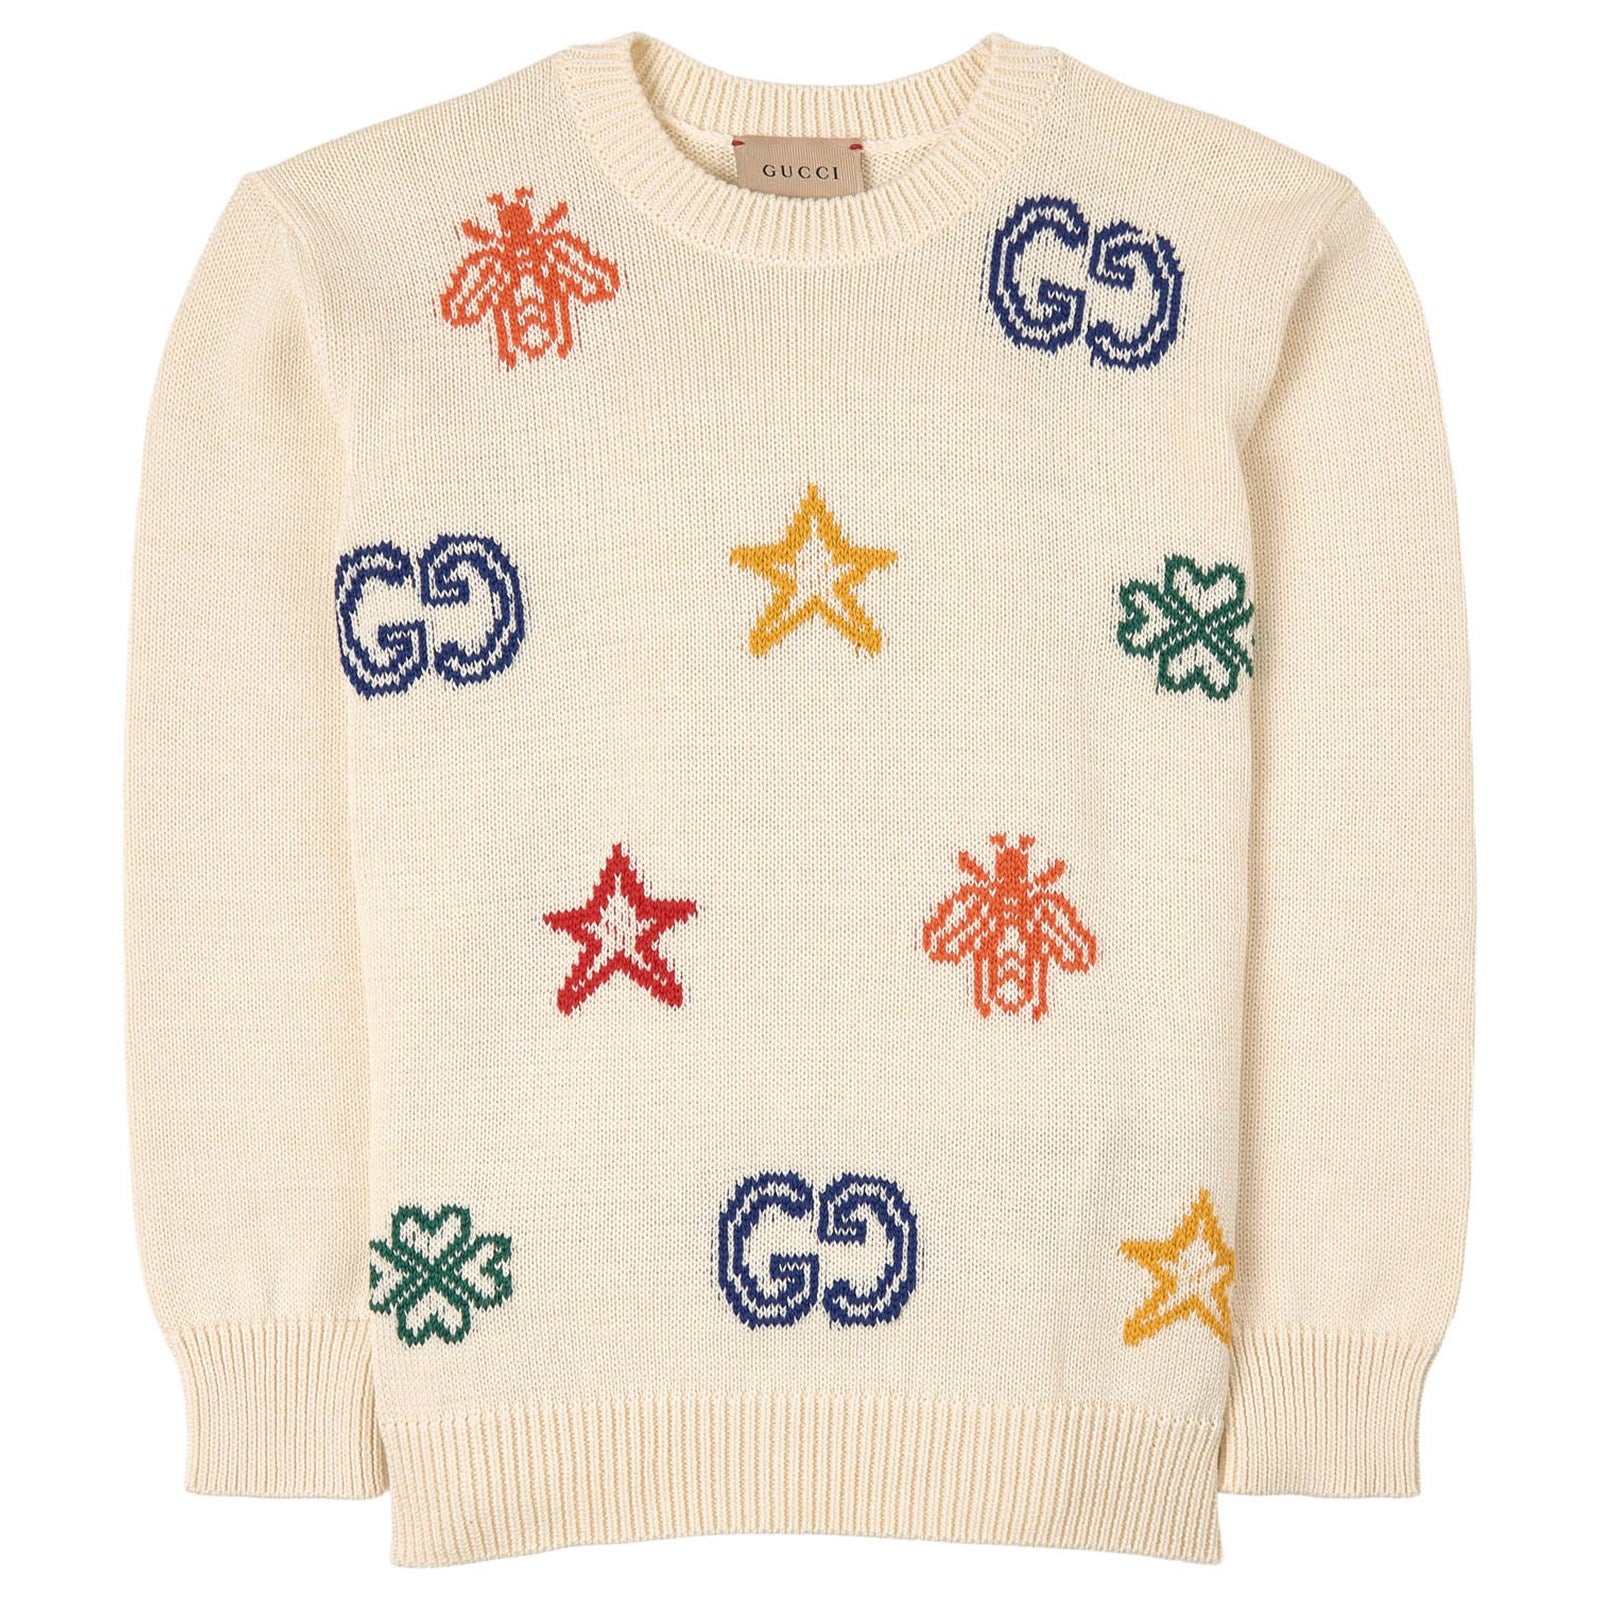 Boys & Girls Ivory Knitted Cotton Sweater